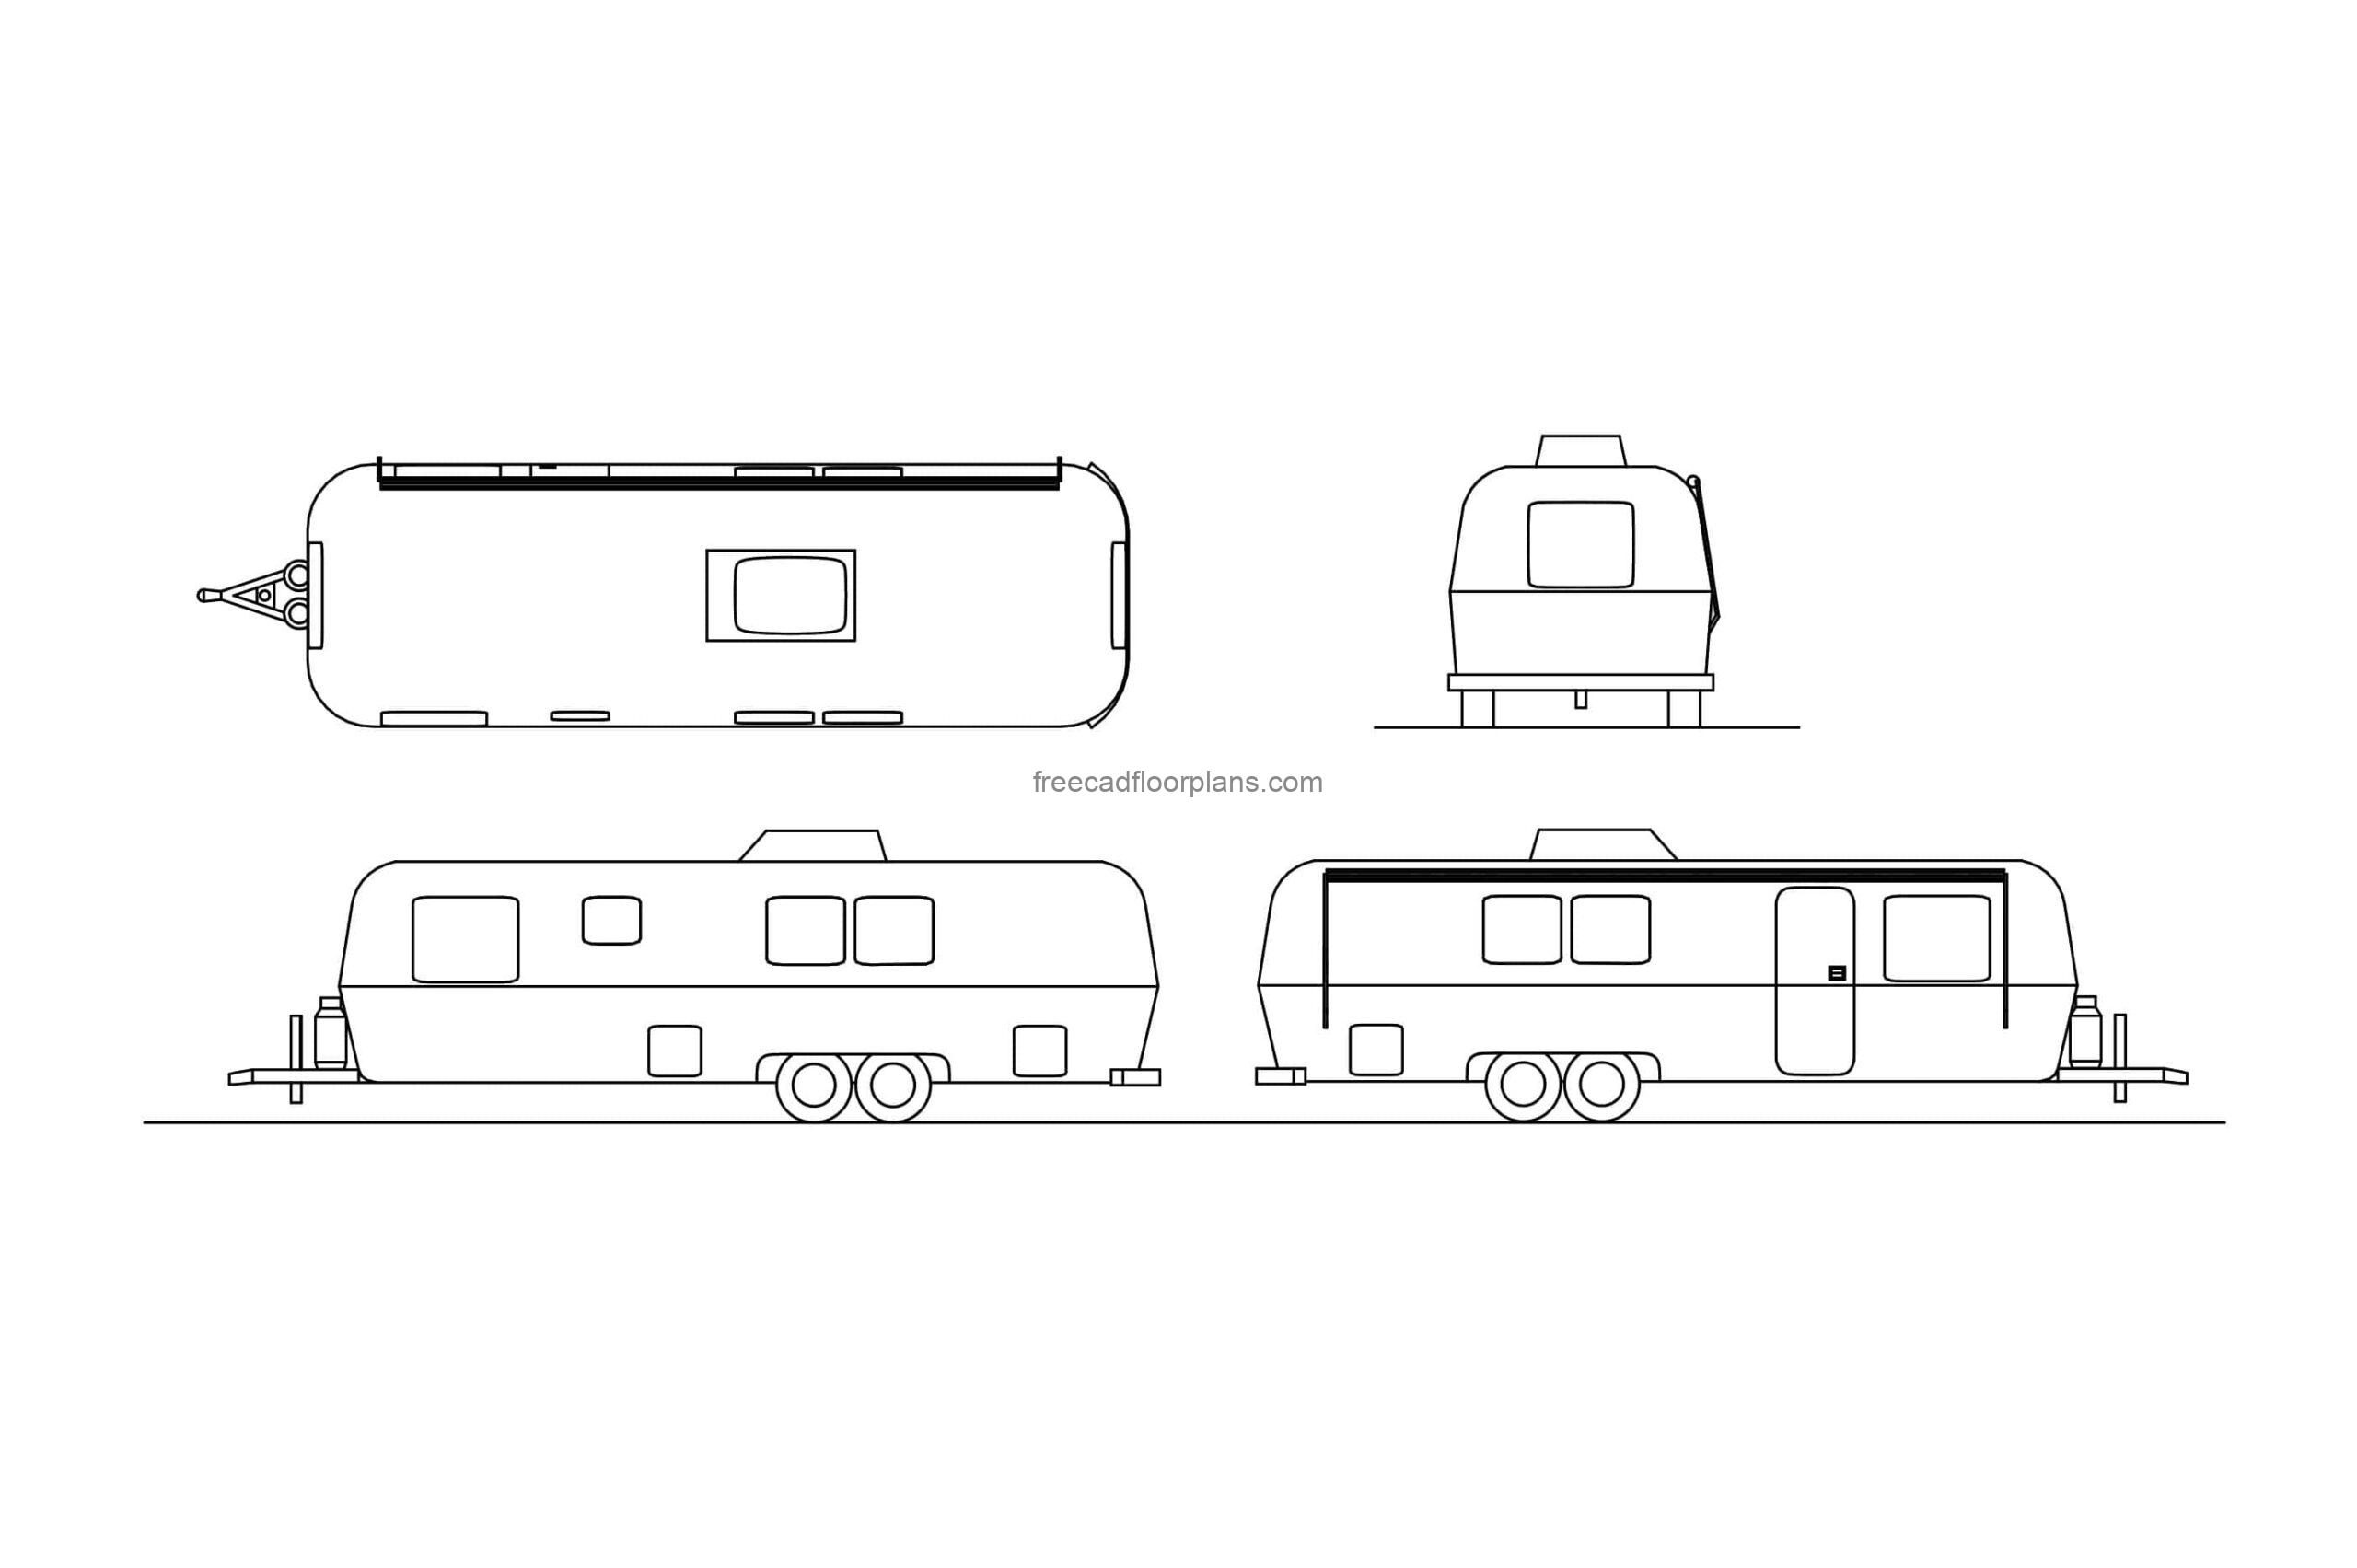 cad block drawing of a airstreamwith all 2d views, plan, and elevations, dwg file for free download